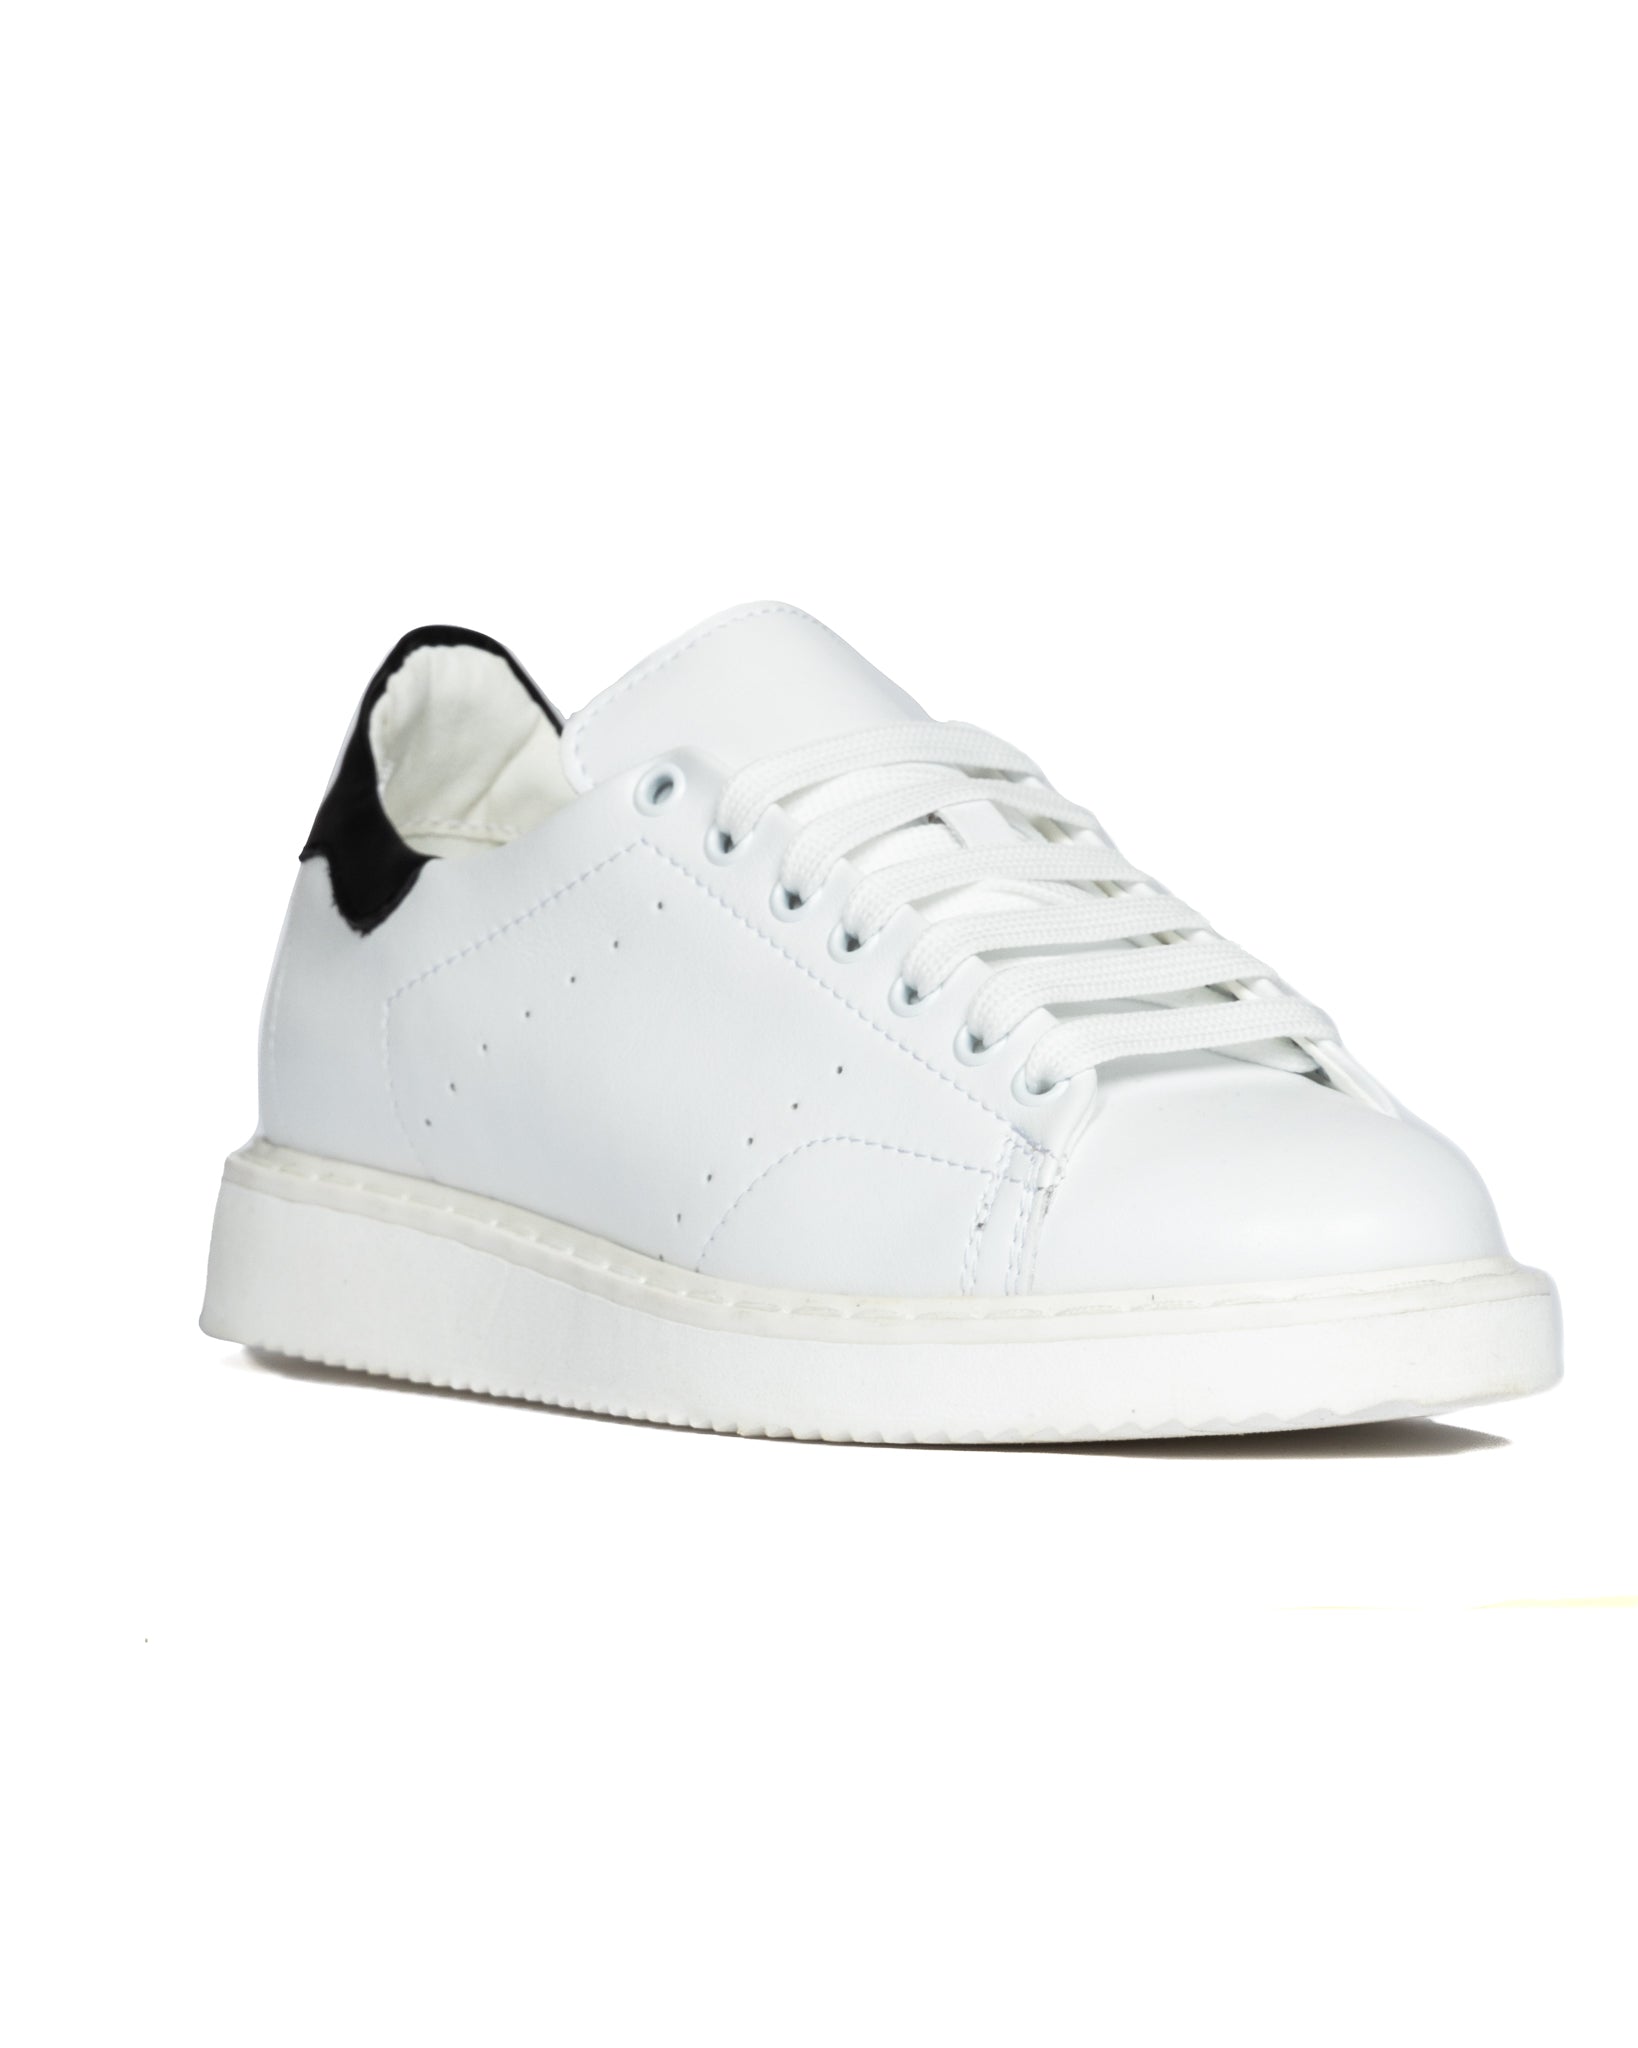 S01 - white leather sneakers with black details